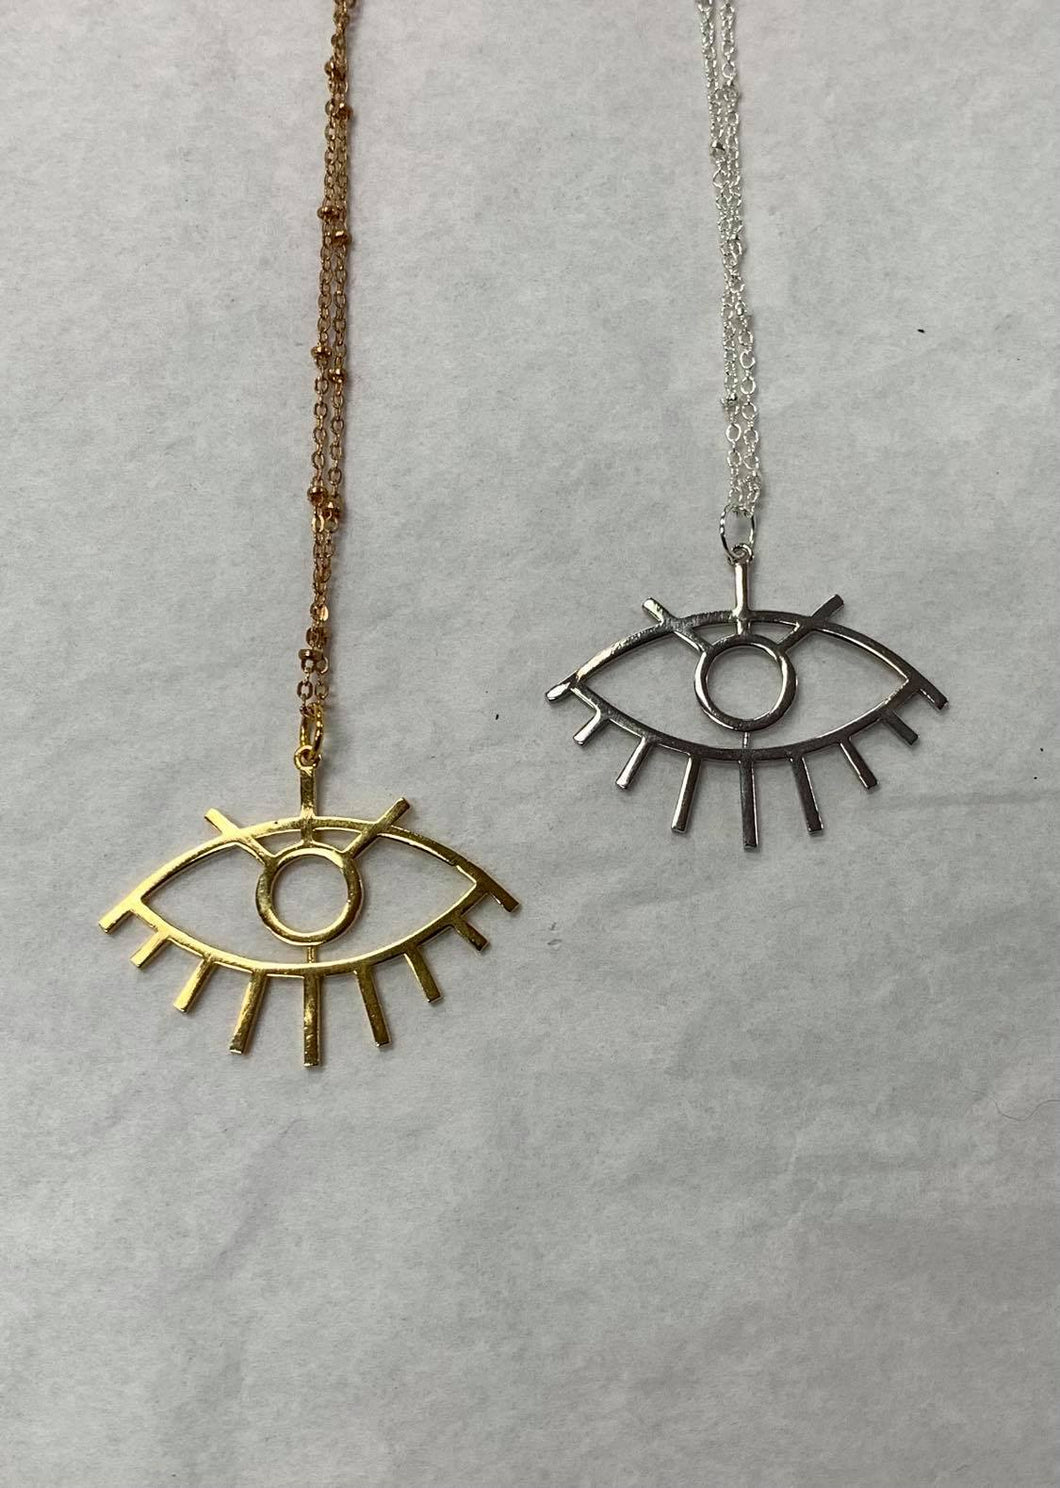 Handcrafted Evil Eye Necklace (Gold or Silver Plated)